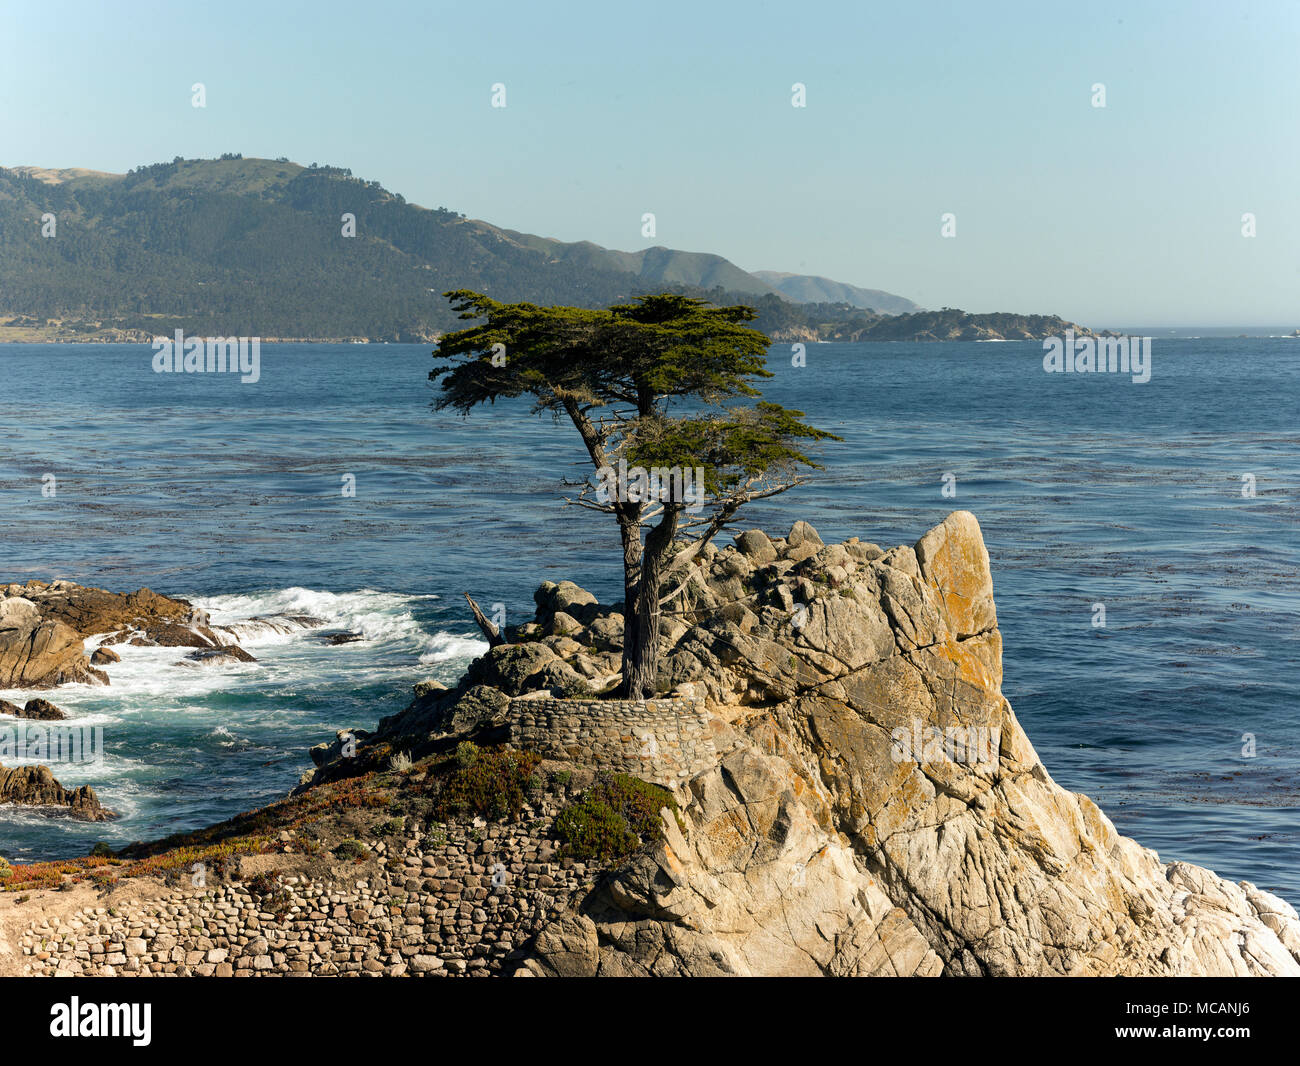 Views from 17-Mile Drive, a scenic road through Pacific Grove and Pebble Beach on the Monterey Peninsula in California Stock Photo